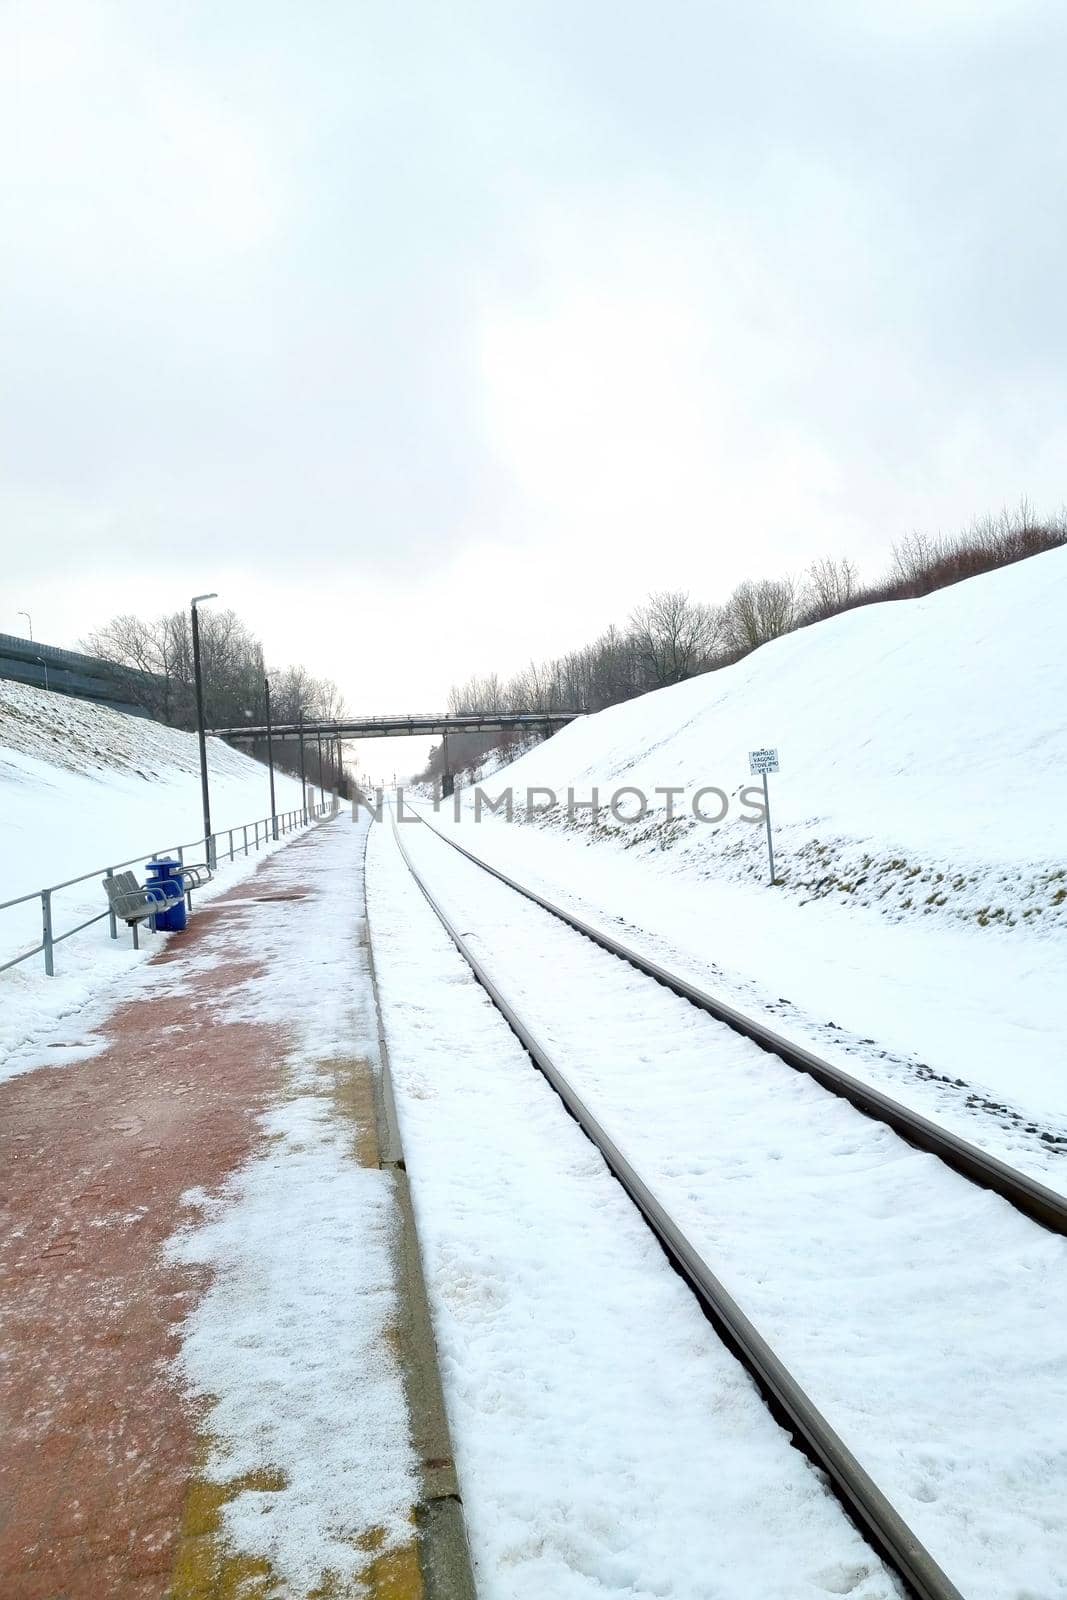 View of the empty platform of the railway station on a winter day